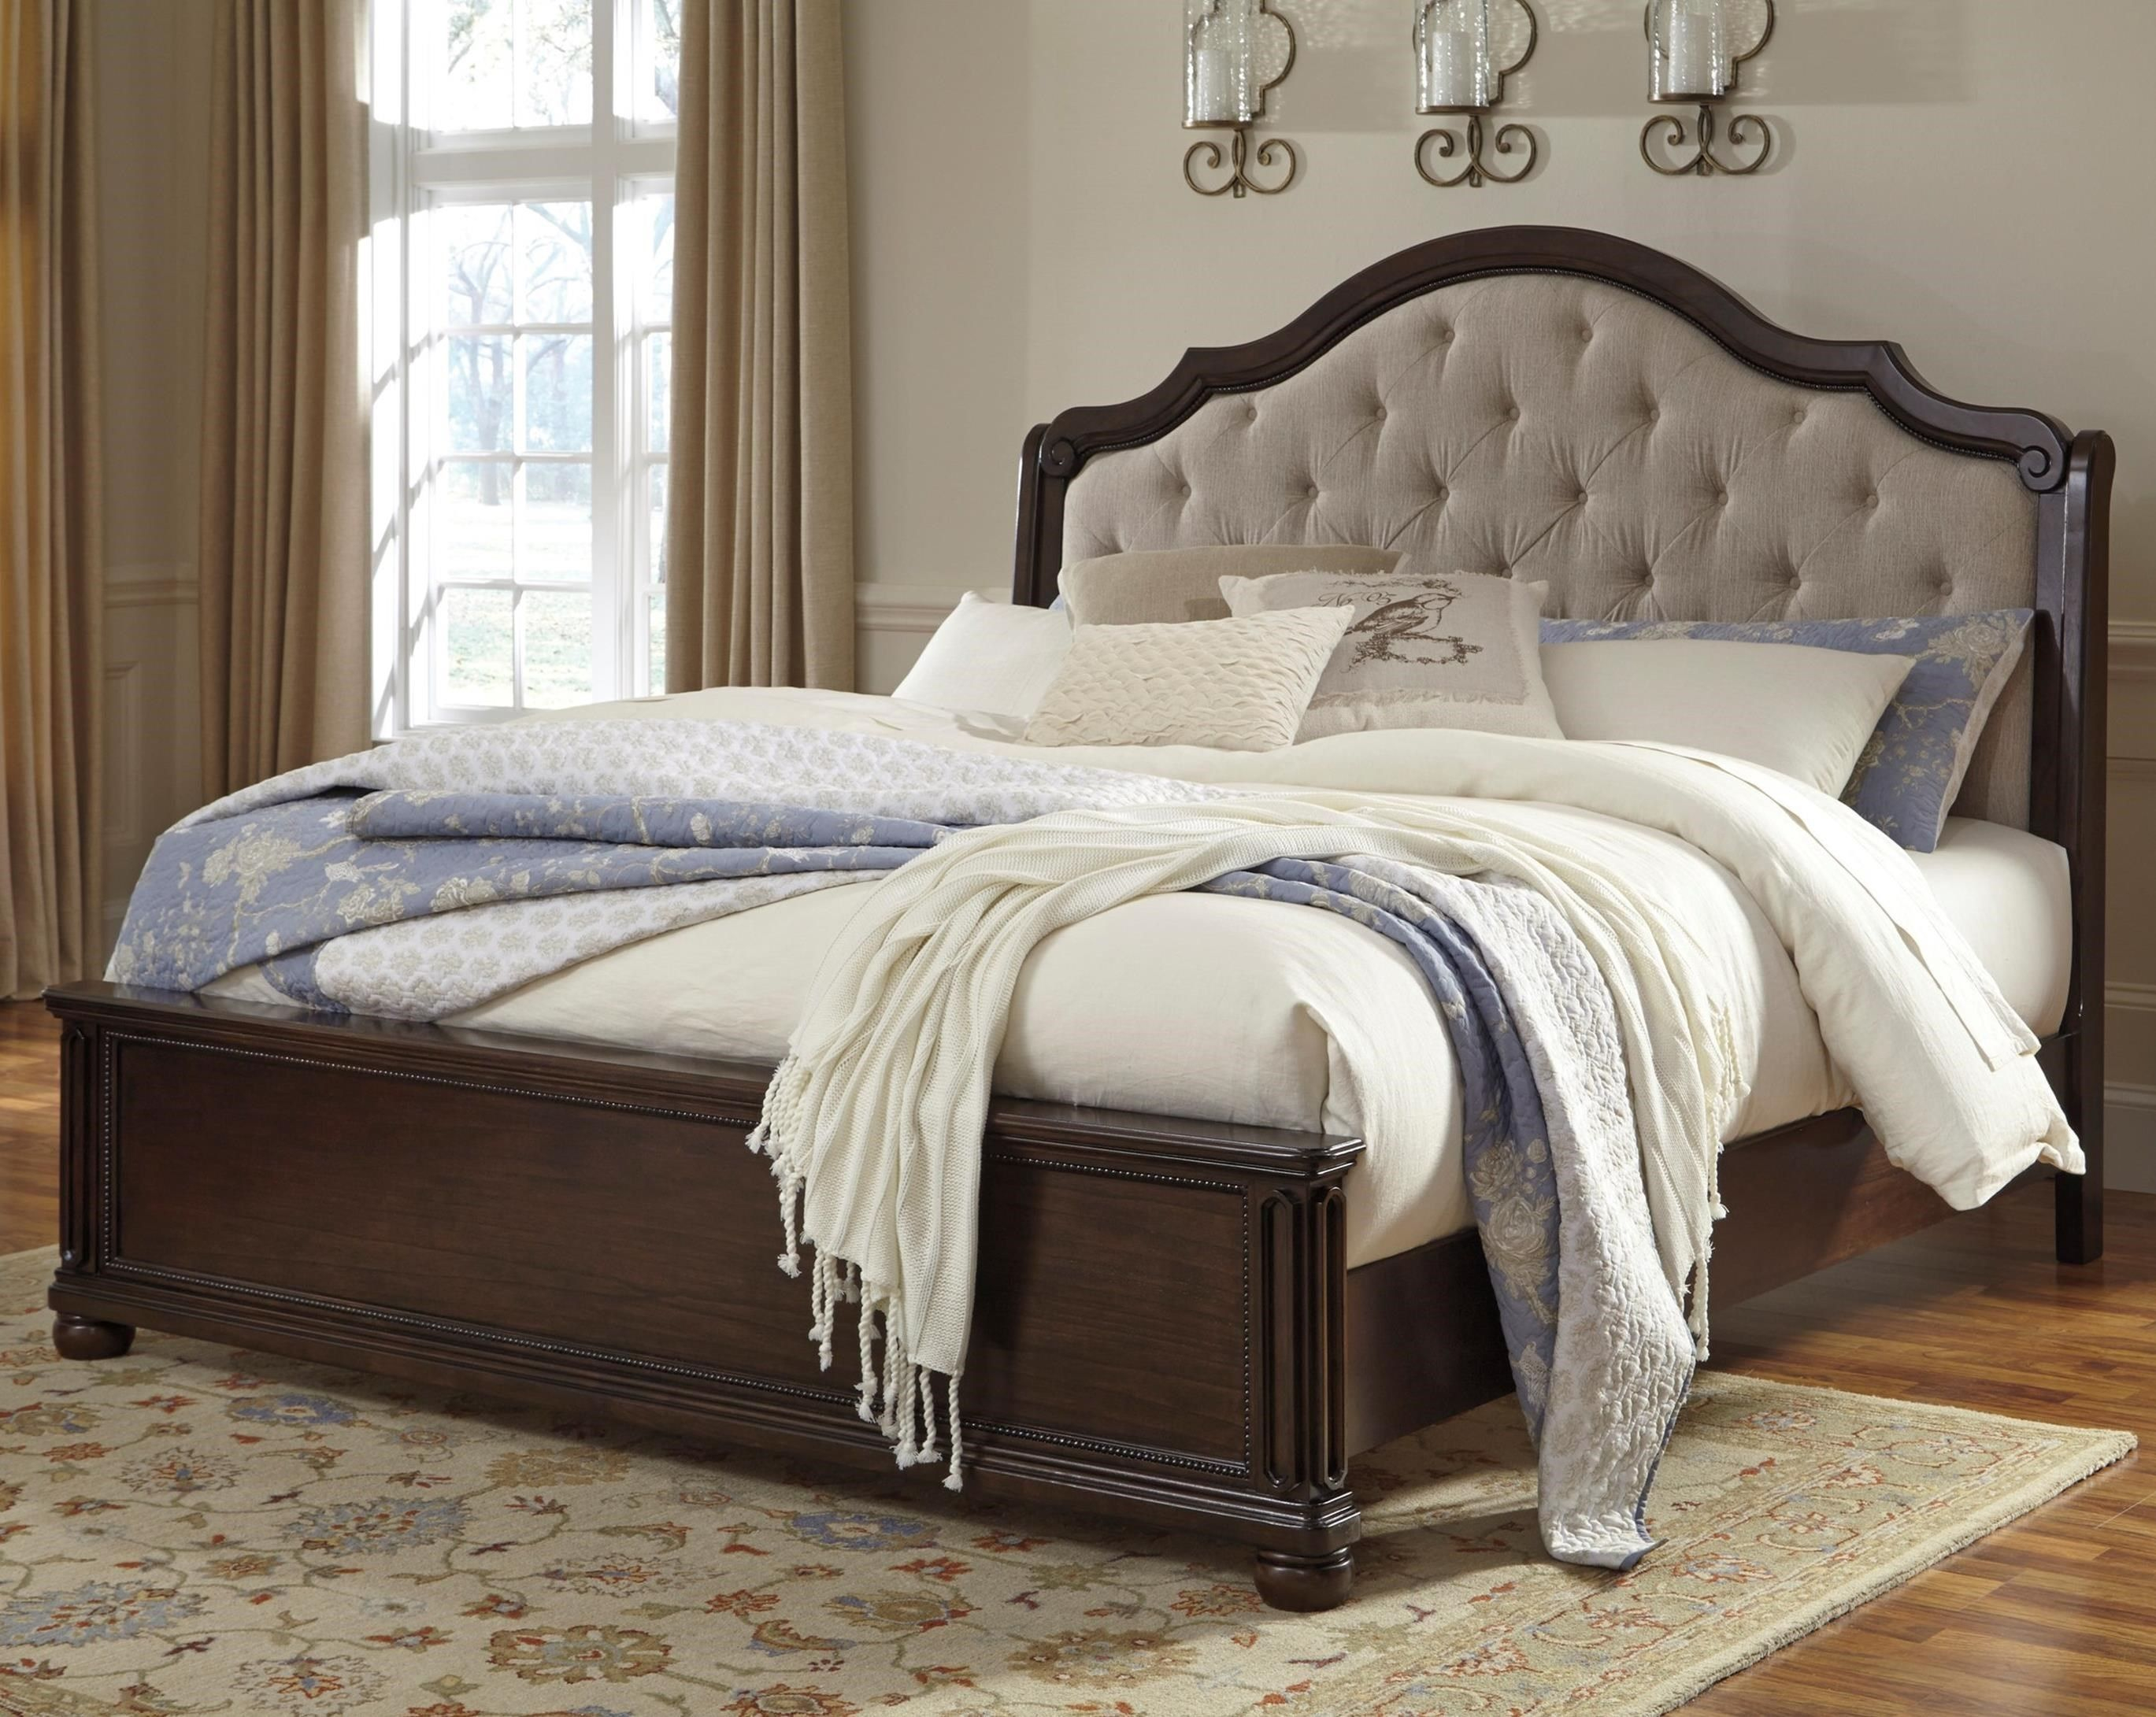 Moluxy Queen Bed With Upholstered Sleigh Headboard Signature pertaining to dimensions 2738 X 2181